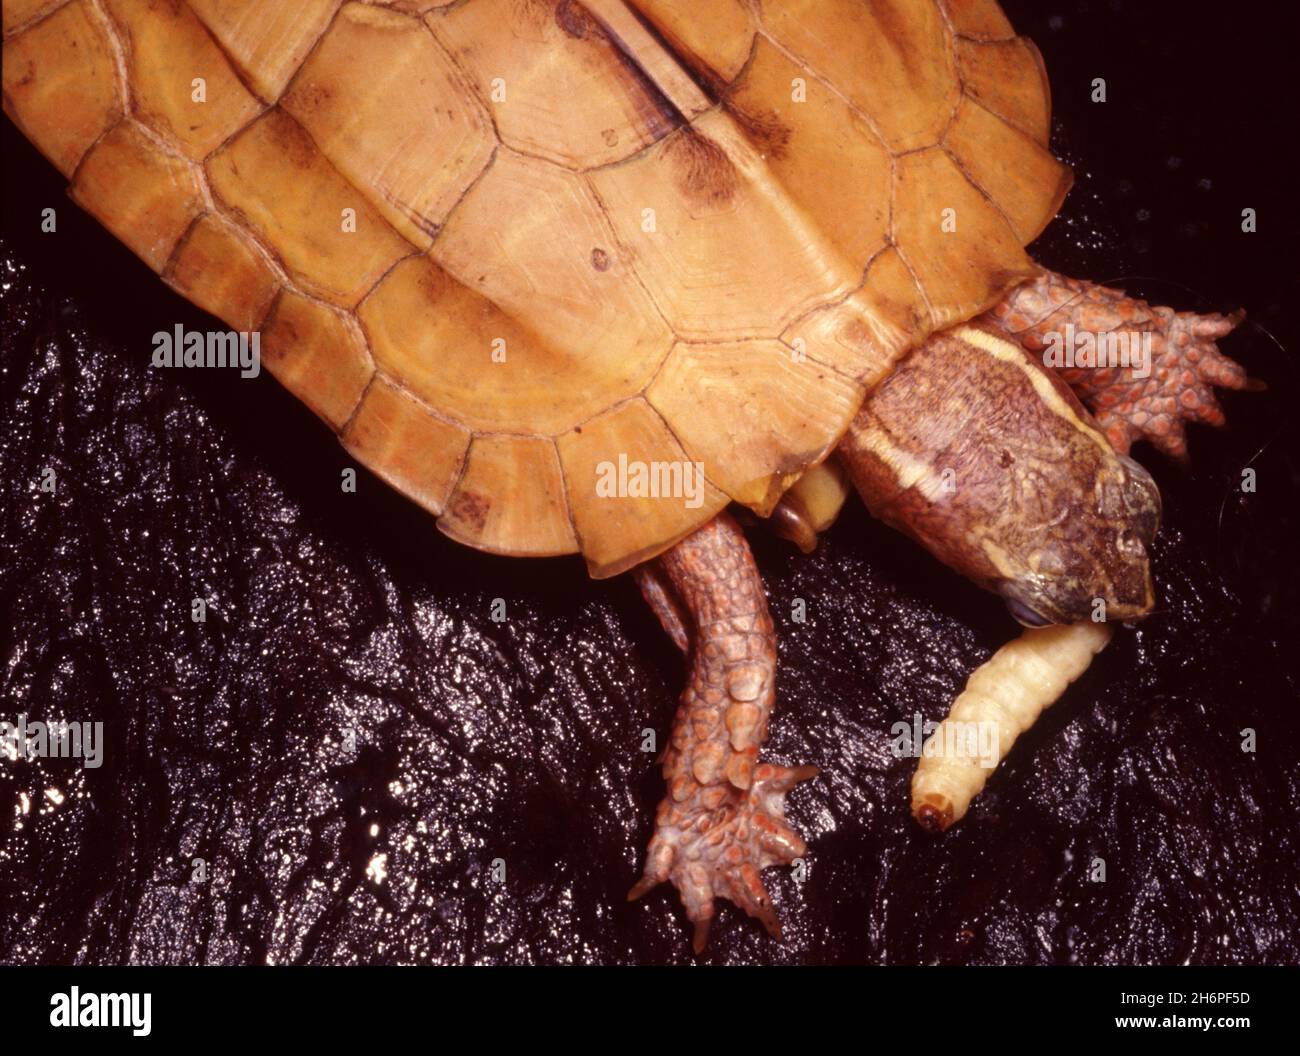 Black-breasted leaf turtle (Geoemyda spengleri), also commonly called Vietnamese leaf turtle or Black-breasted hill turtle, feeding larva of wax  moth Stock Photo